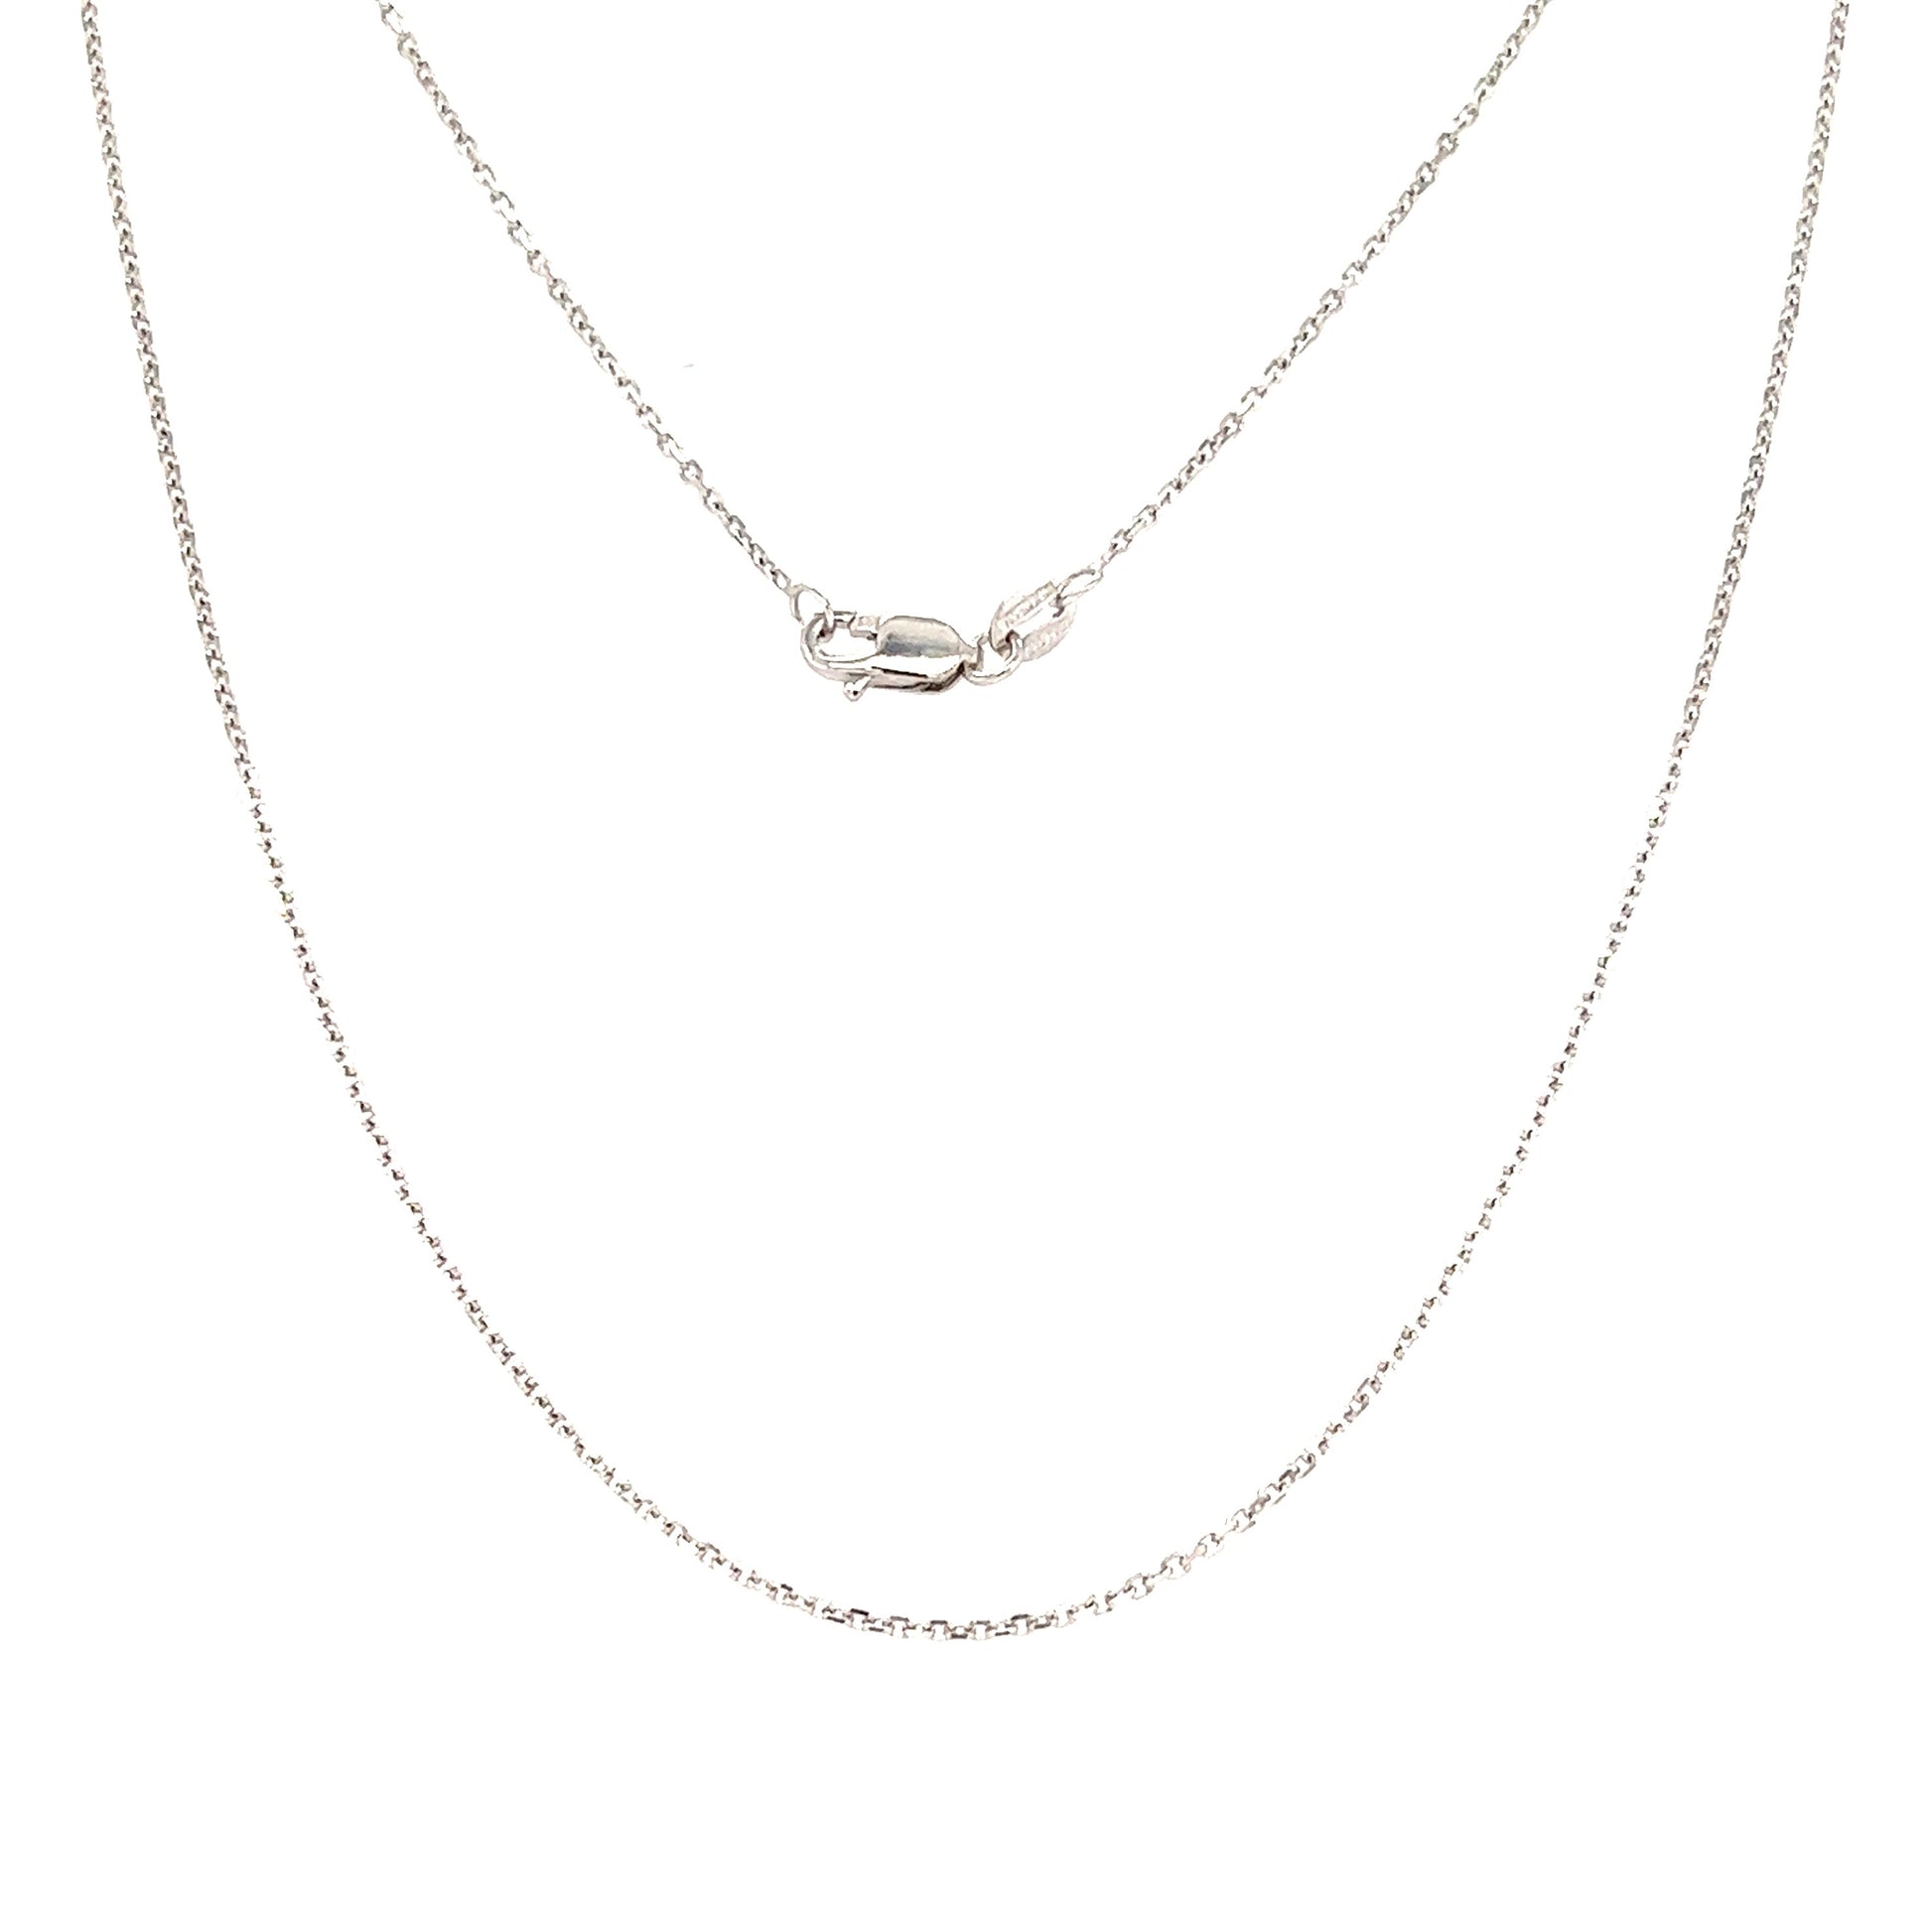 Cable 1.0mm Chain with 18in Length in 14K White Gold Full Chain Alternative View